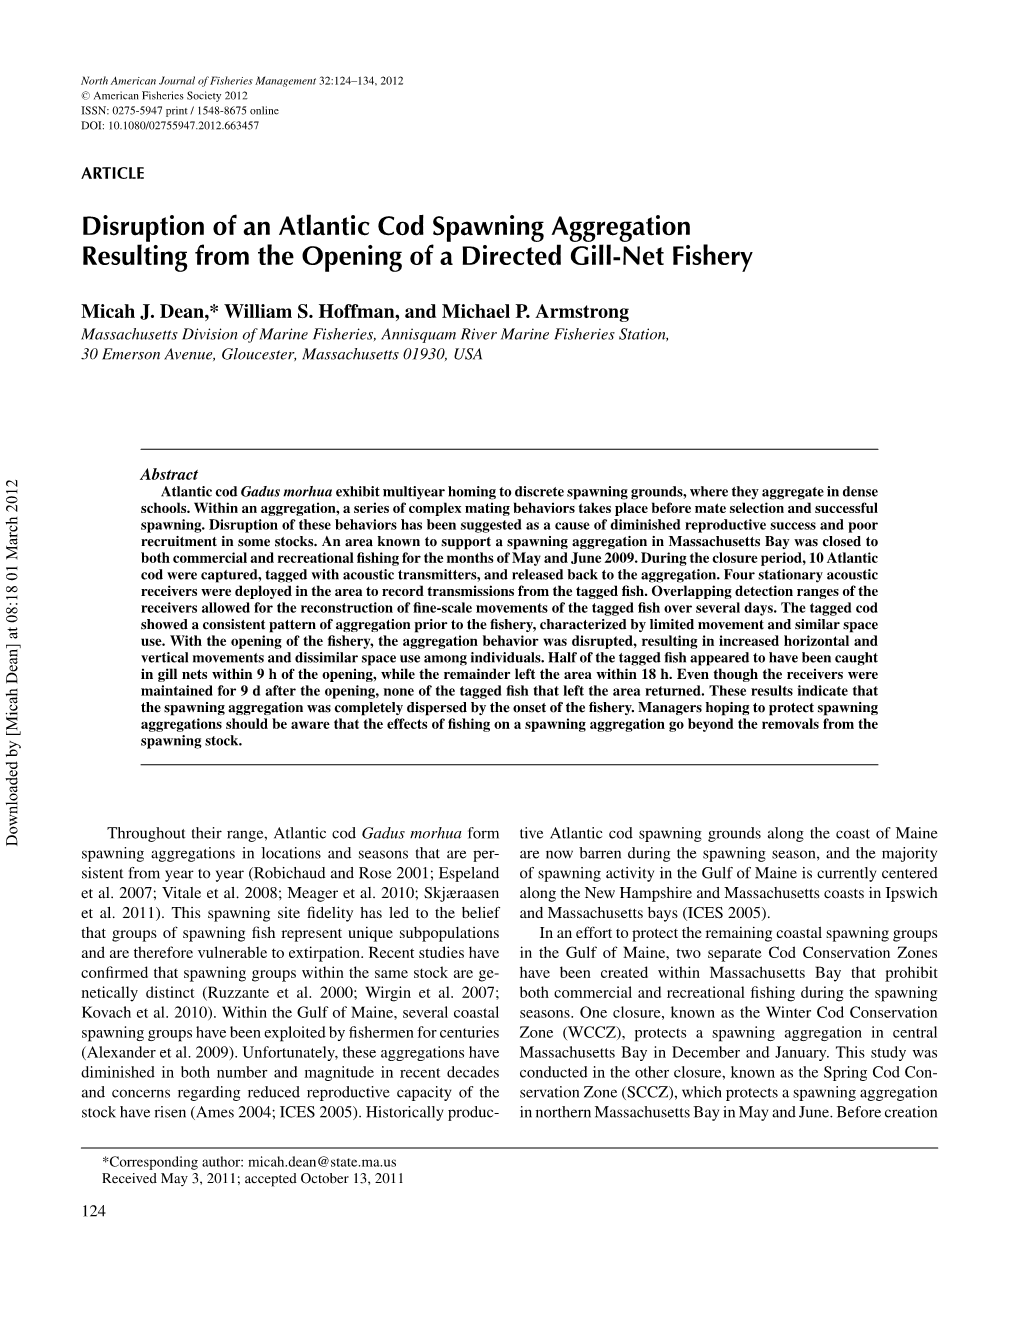 Disruption of an Atlantic Cod Spawning Aggregation Resulting from the Opening of a Directed Gill-Net Fishery